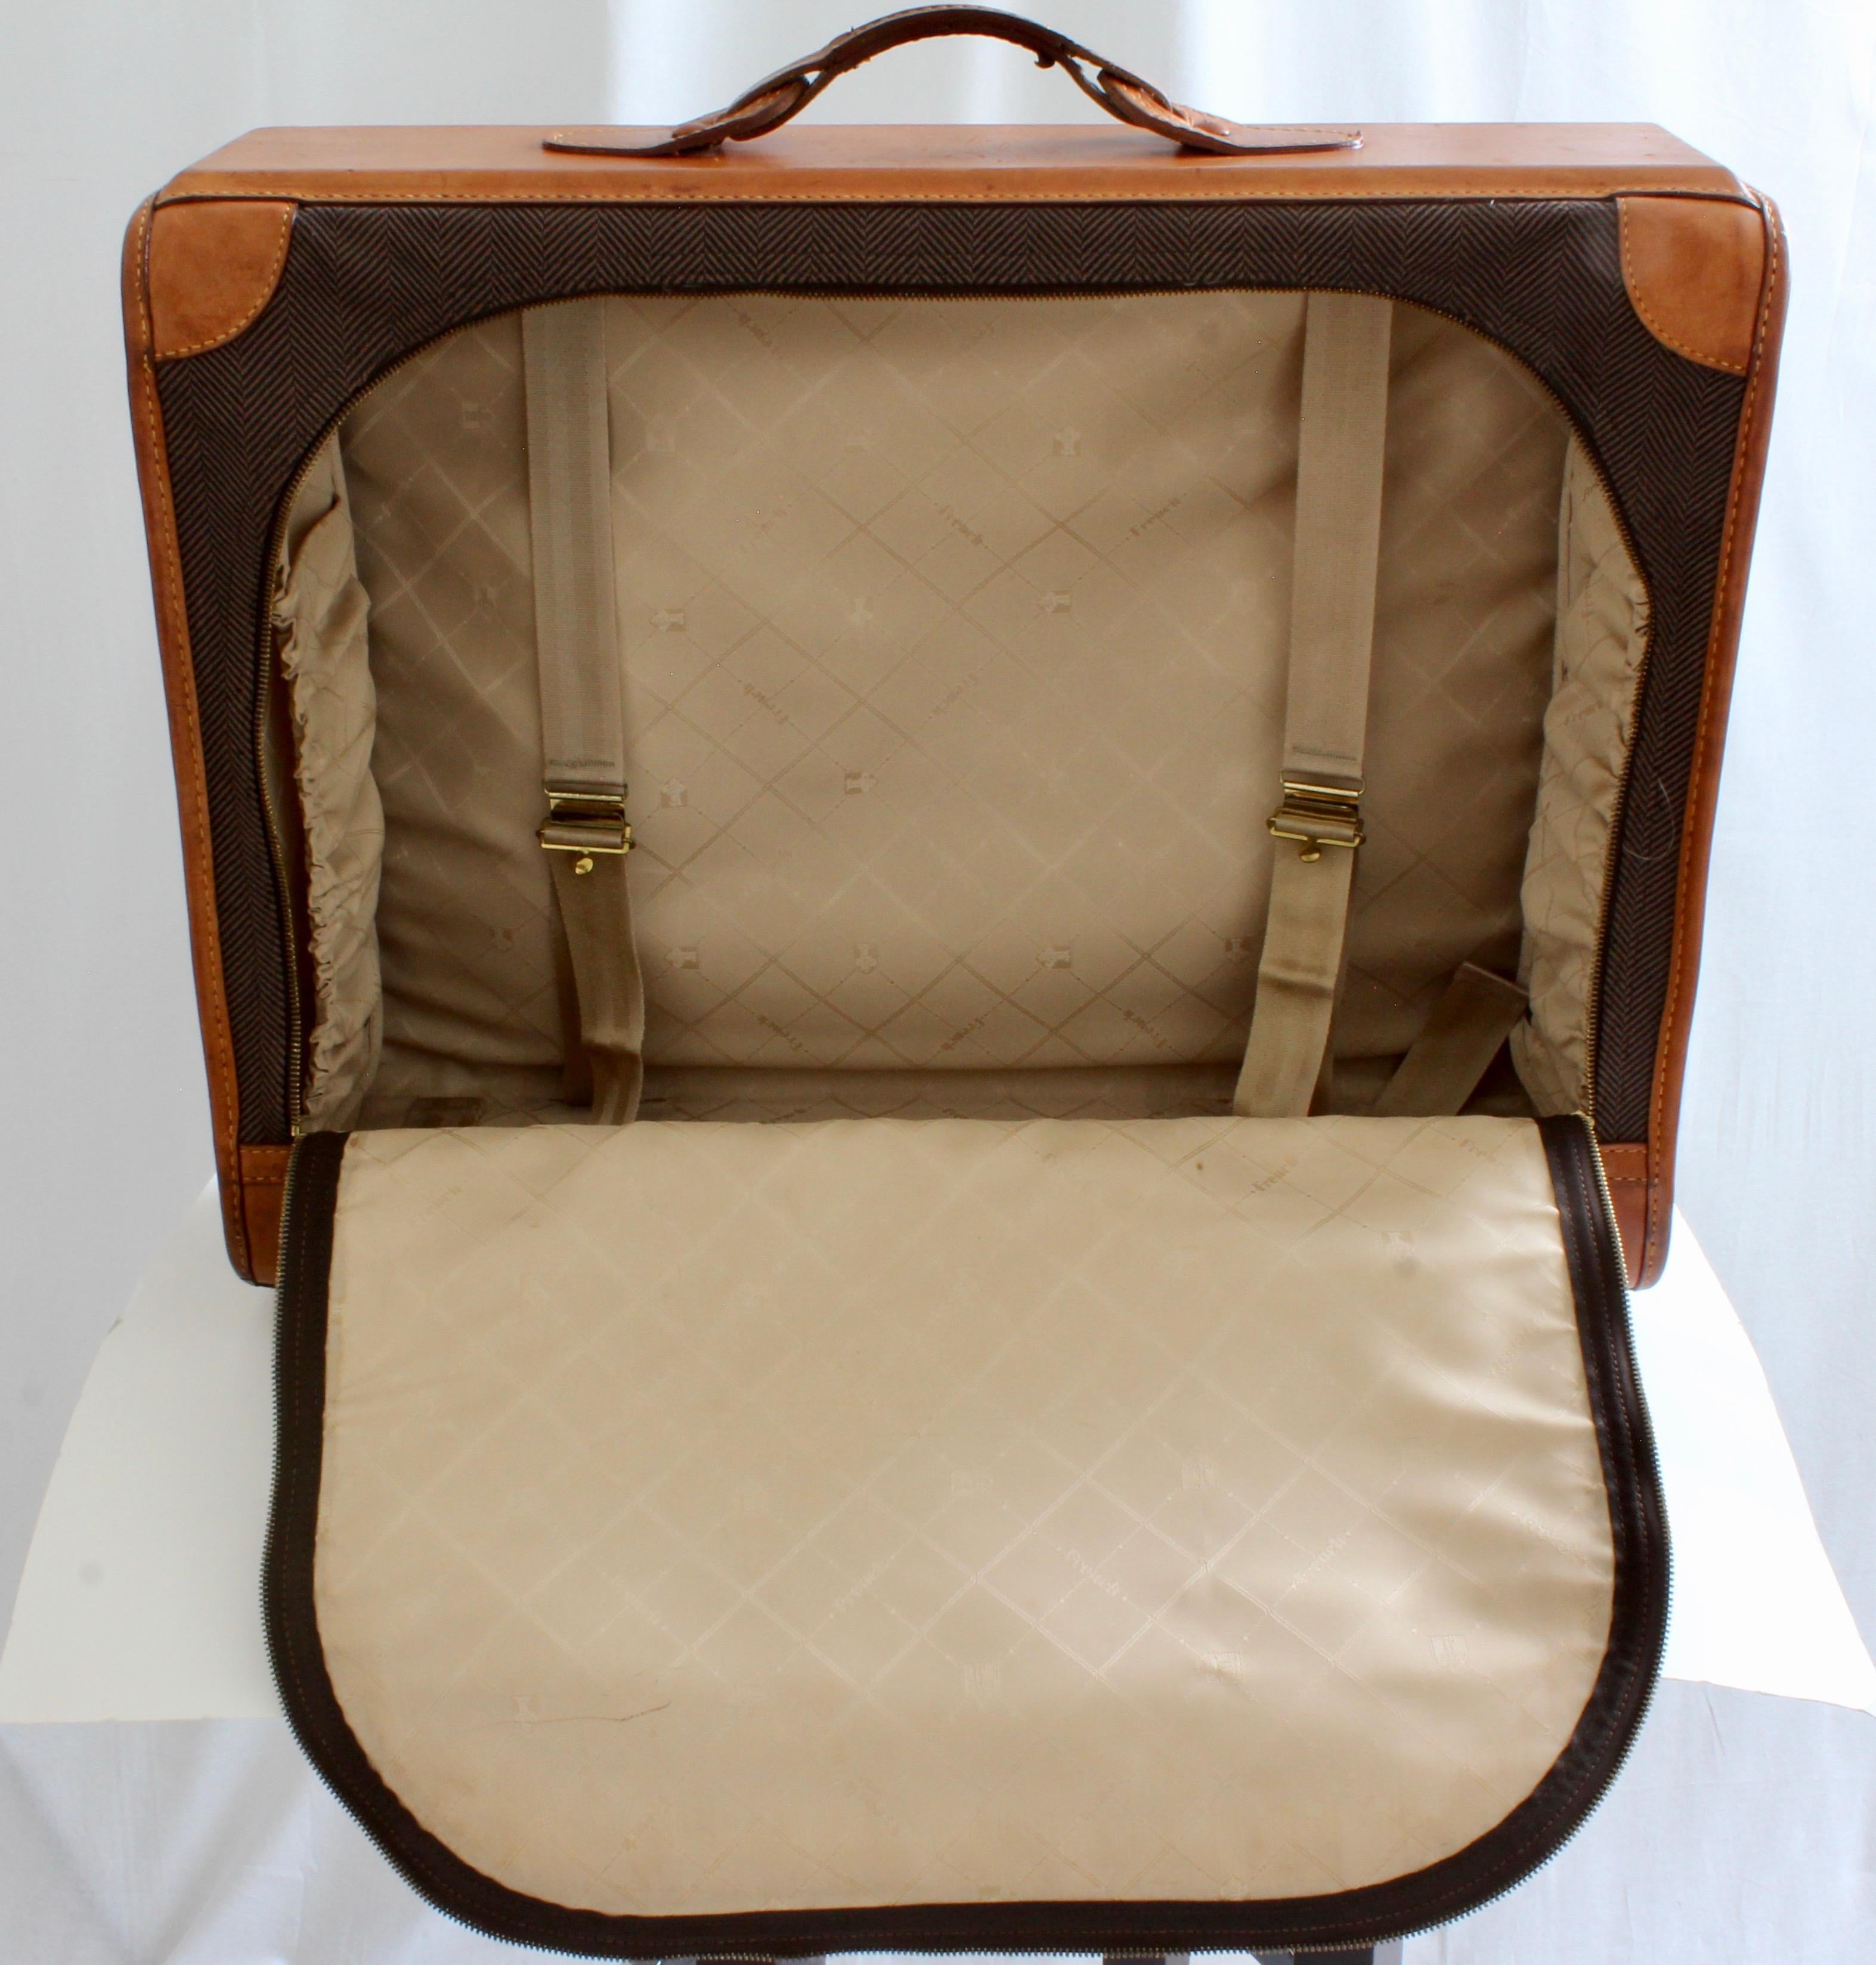 French Company Suitcase Rare Herringbone & Leather Luggage Travel Bag 24in 80s 1